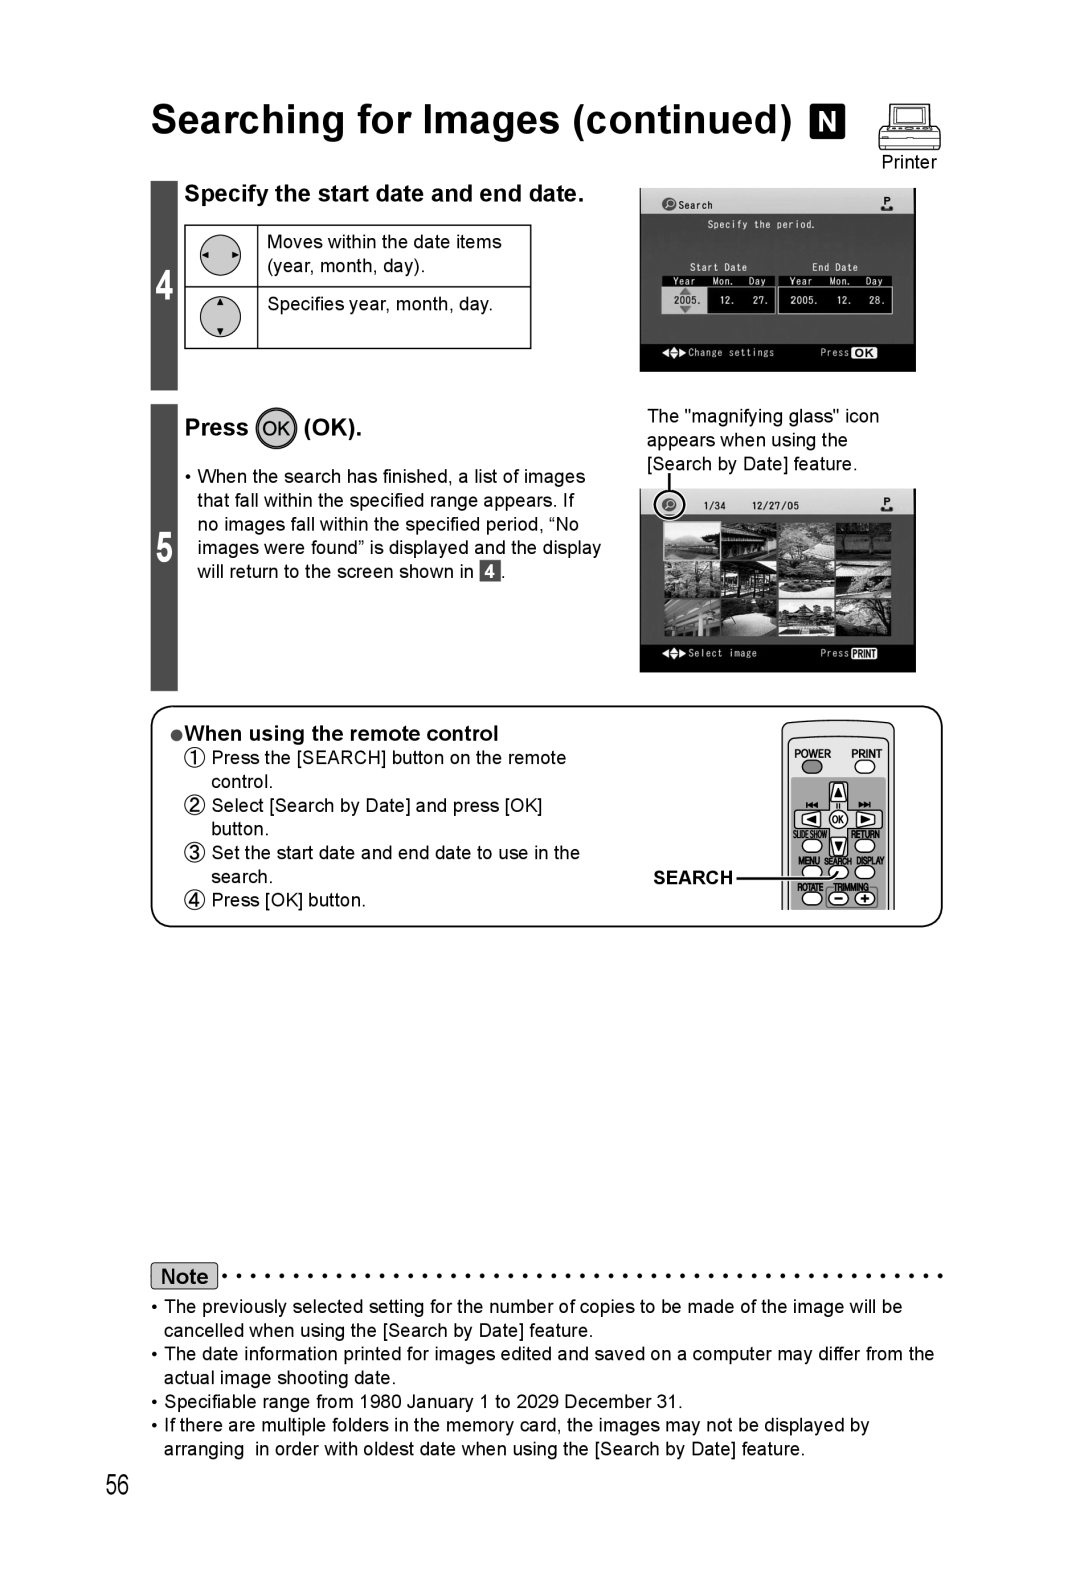 Panasonic KX-PX20M operating instructions Searching for Images continued, Specify the start date and end date, Press OK 